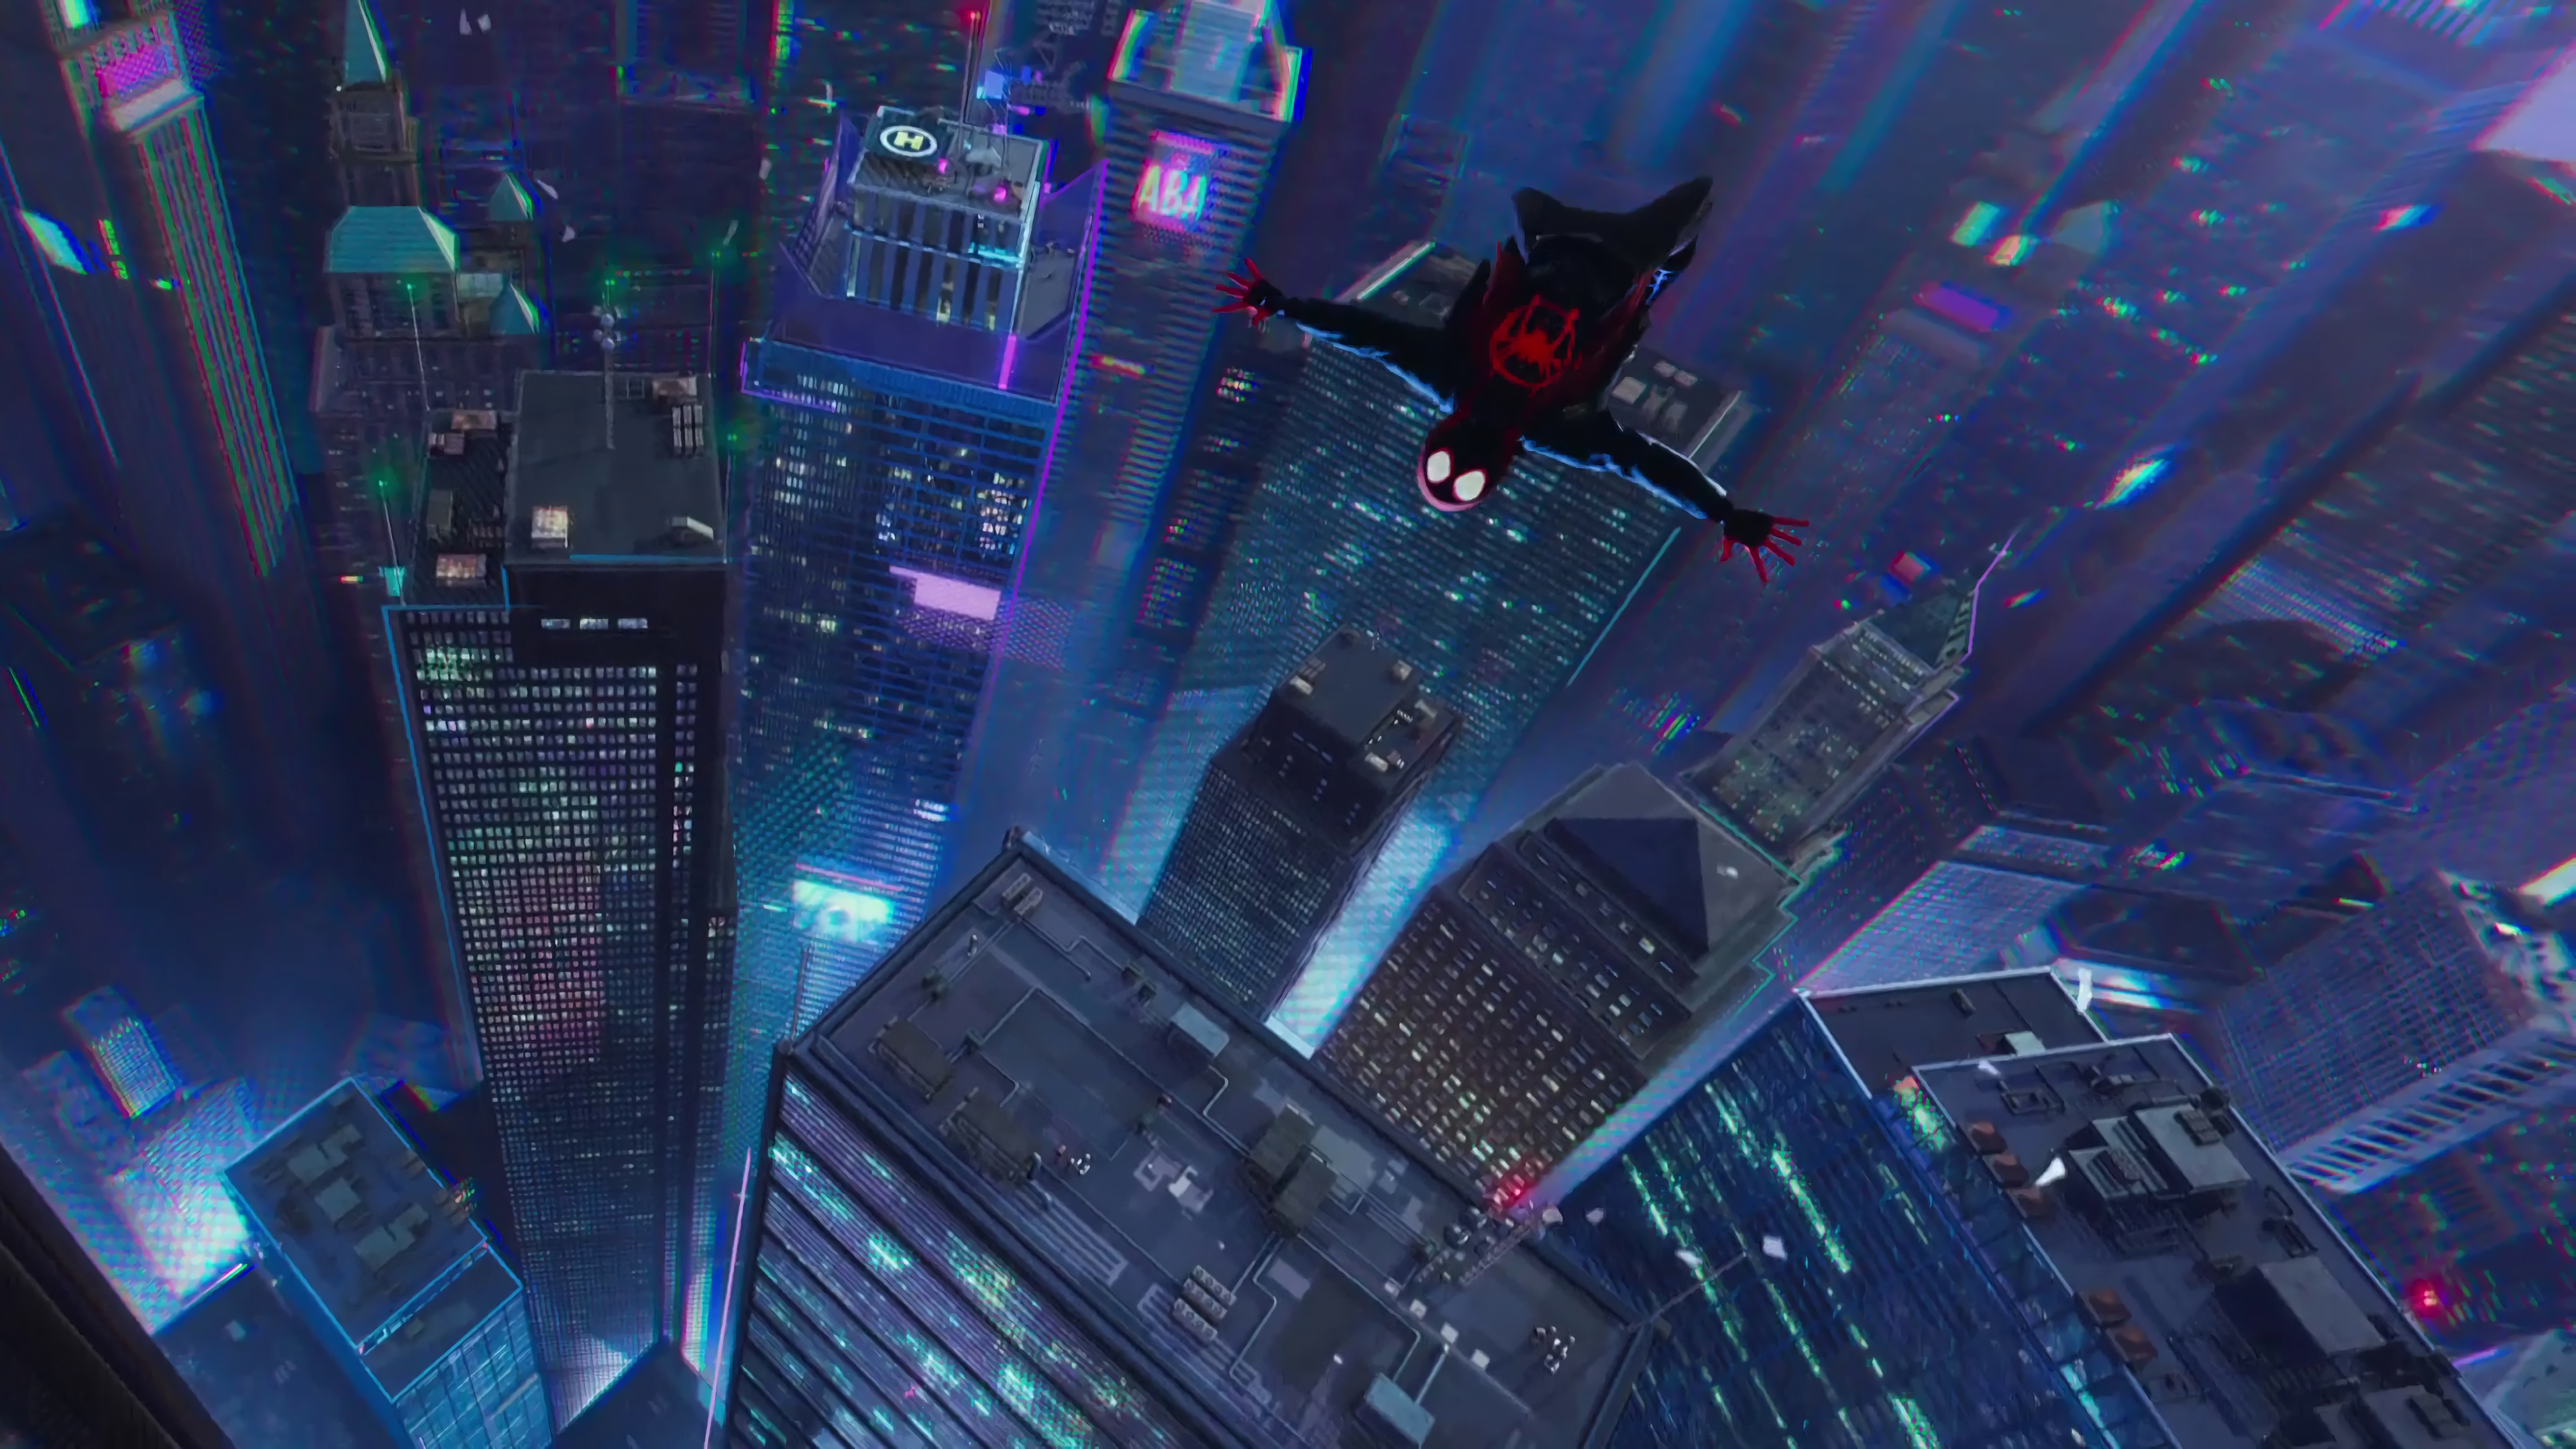 Spider-Man: Into The Spider-Verse Wallpapers, Pictures, Images